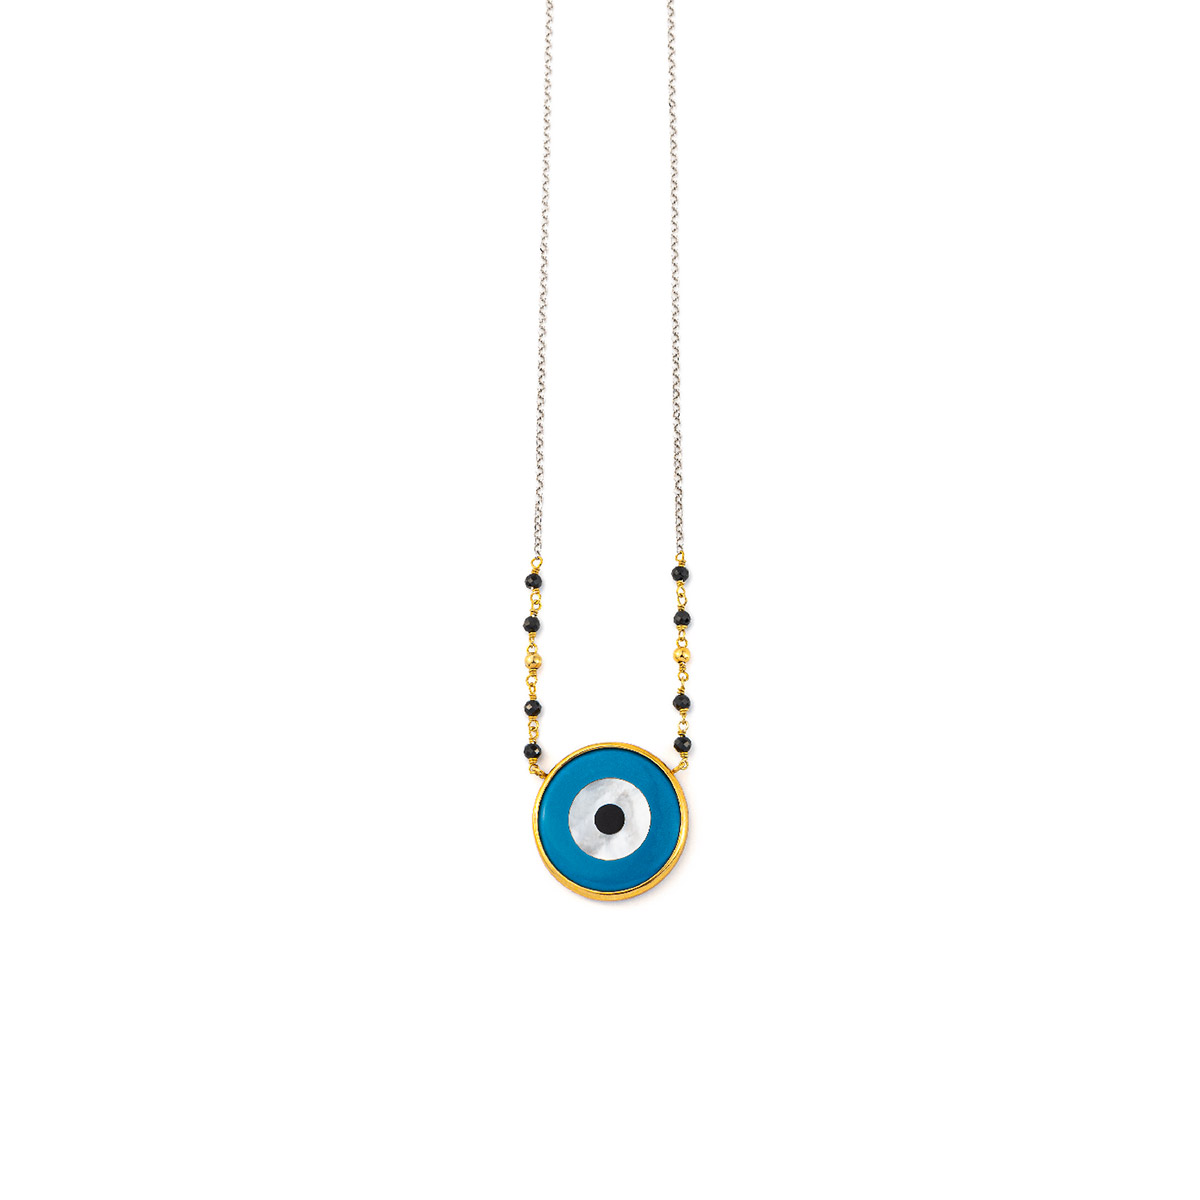 Chain Necklace with Beads and a Blue Eye - 925 Sterling Silver